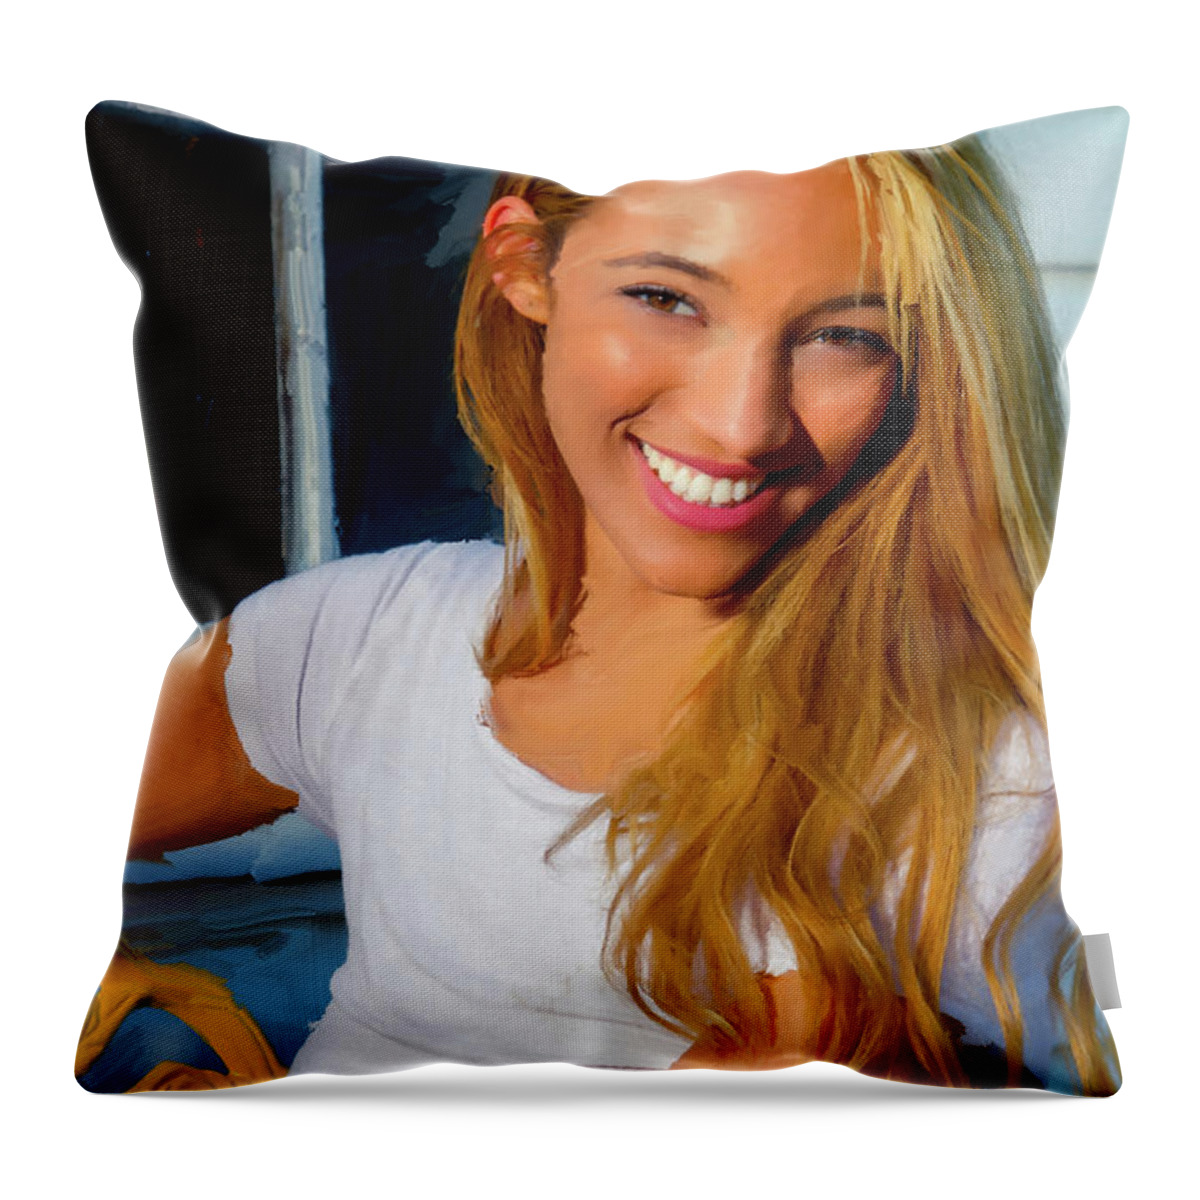 Female Throw Pillow featuring the photograph Tessa On The Porch by Thomas Leparskas